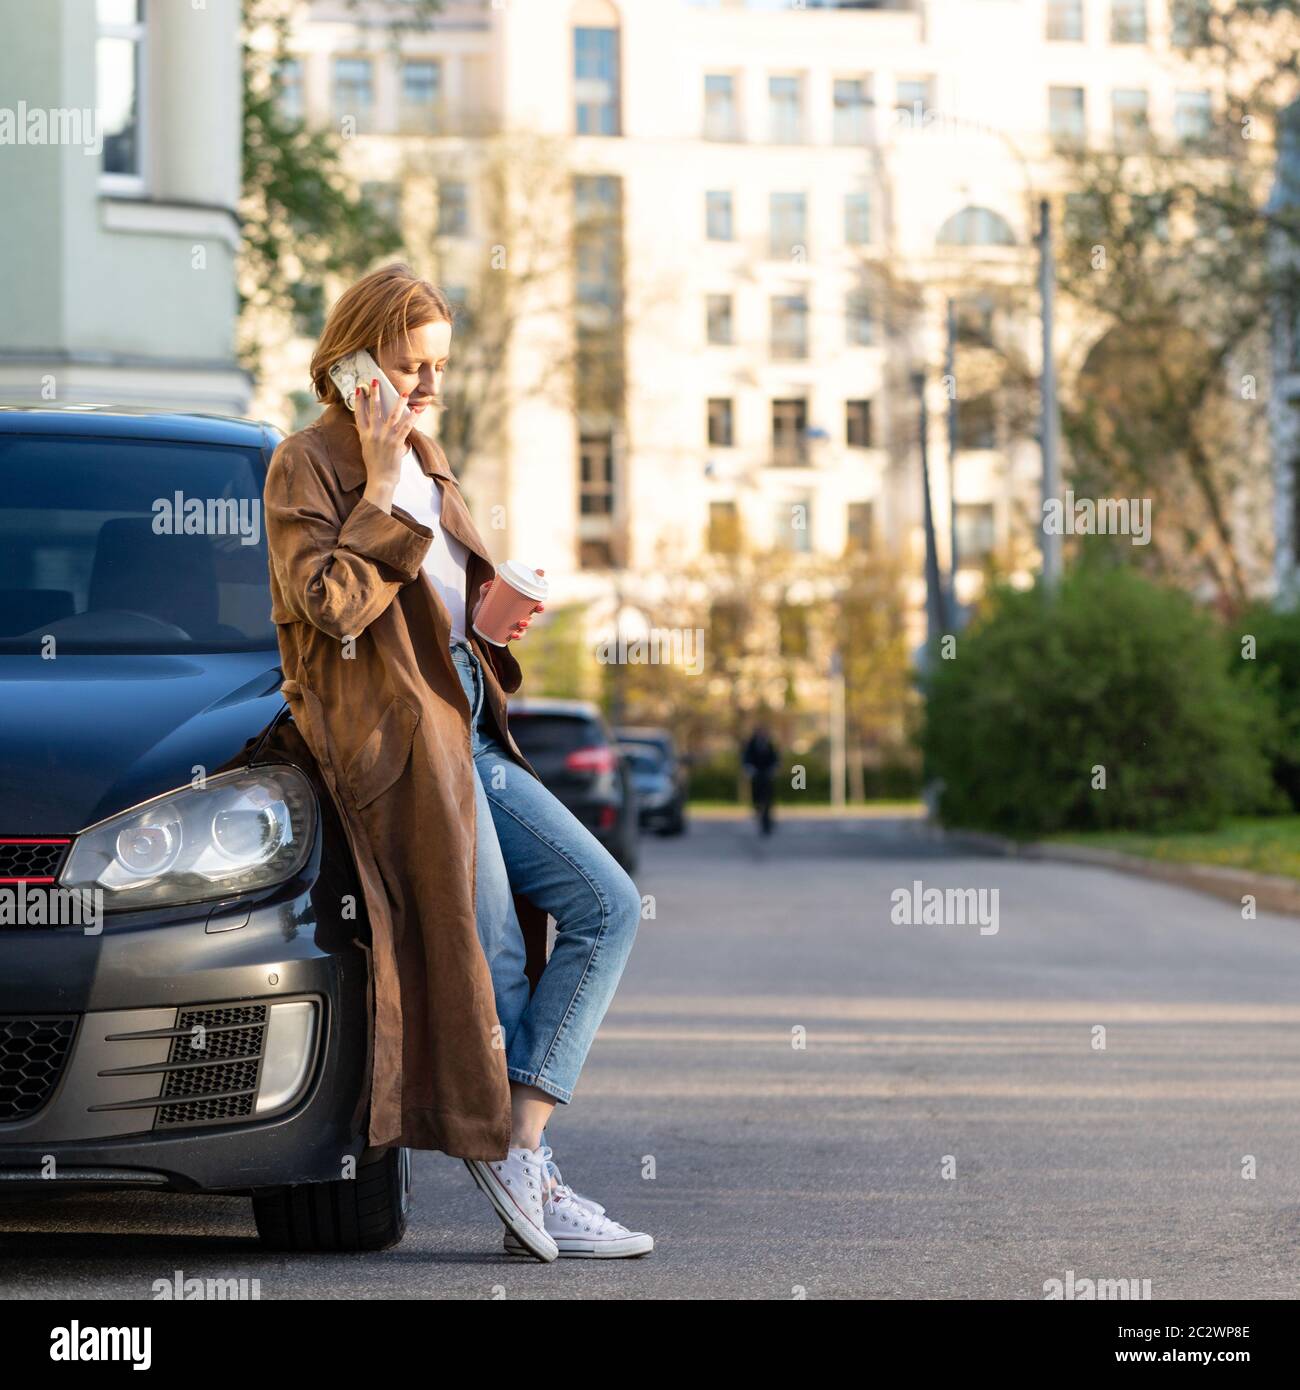 Young caucasian woman standing near her car and talking on the phone, holding a coffee cup, wearing beige trench coat Stock Photo